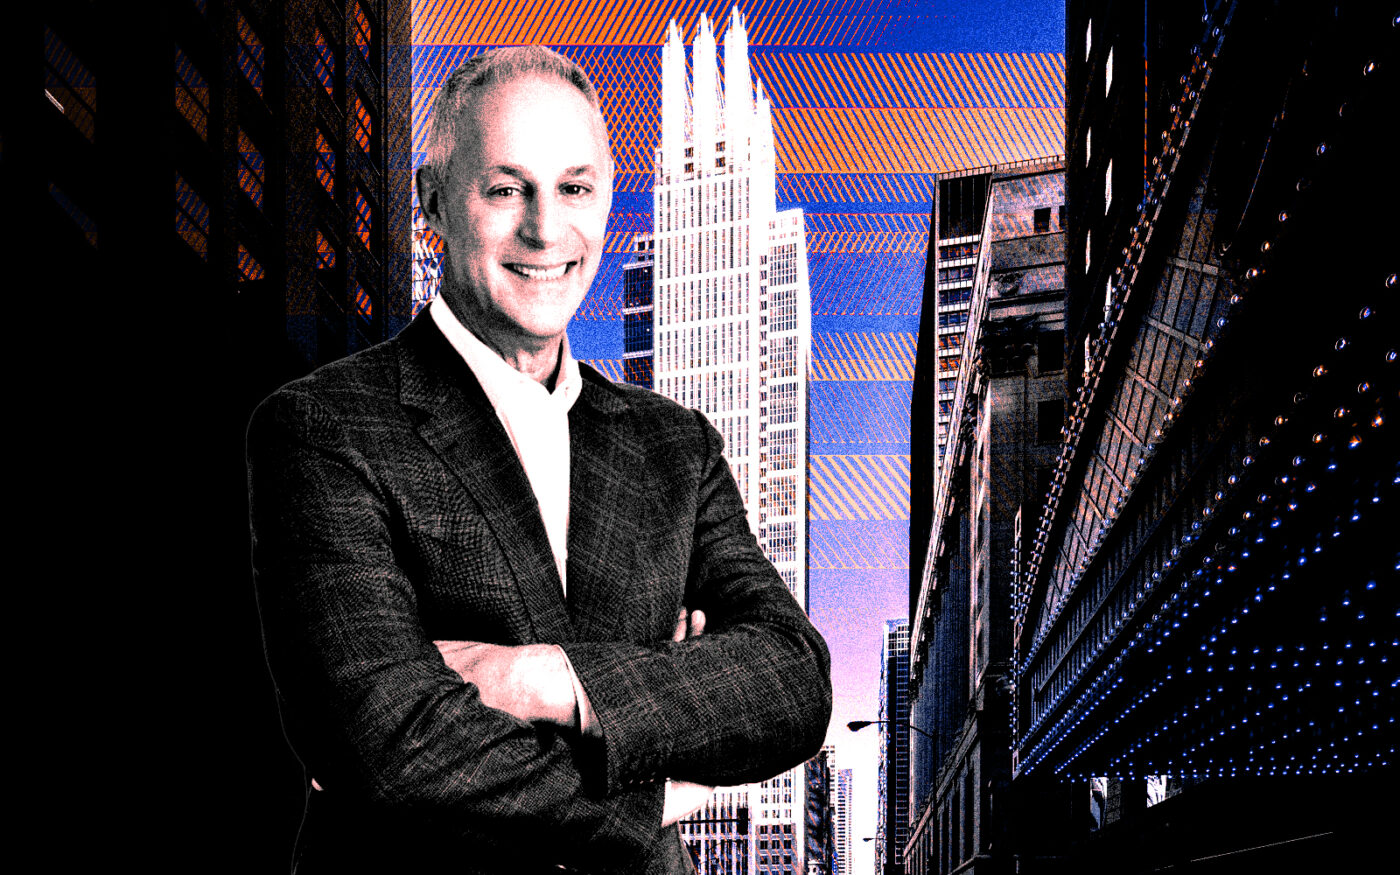 Farpoint Development in Line to Buy Distressed Chicago Tower